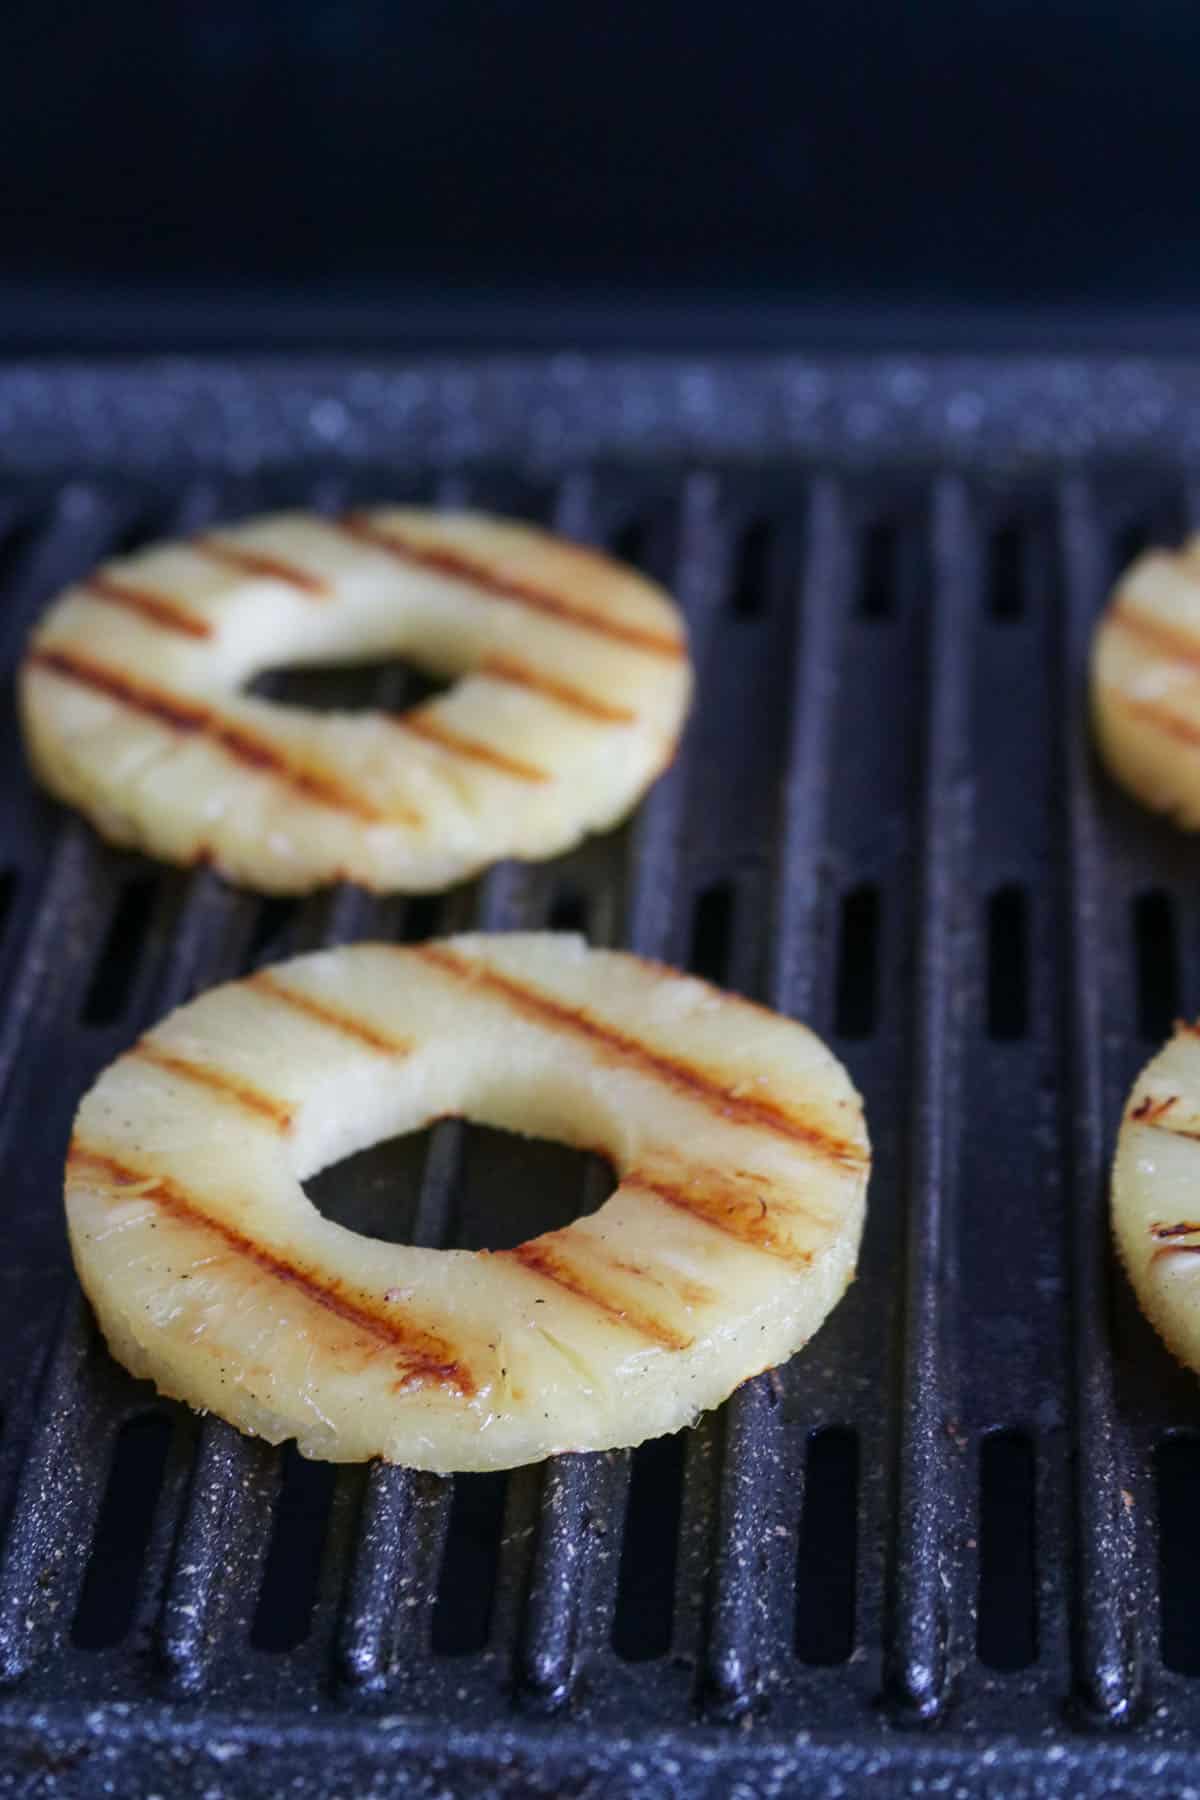 Grilling the pineapple rings.